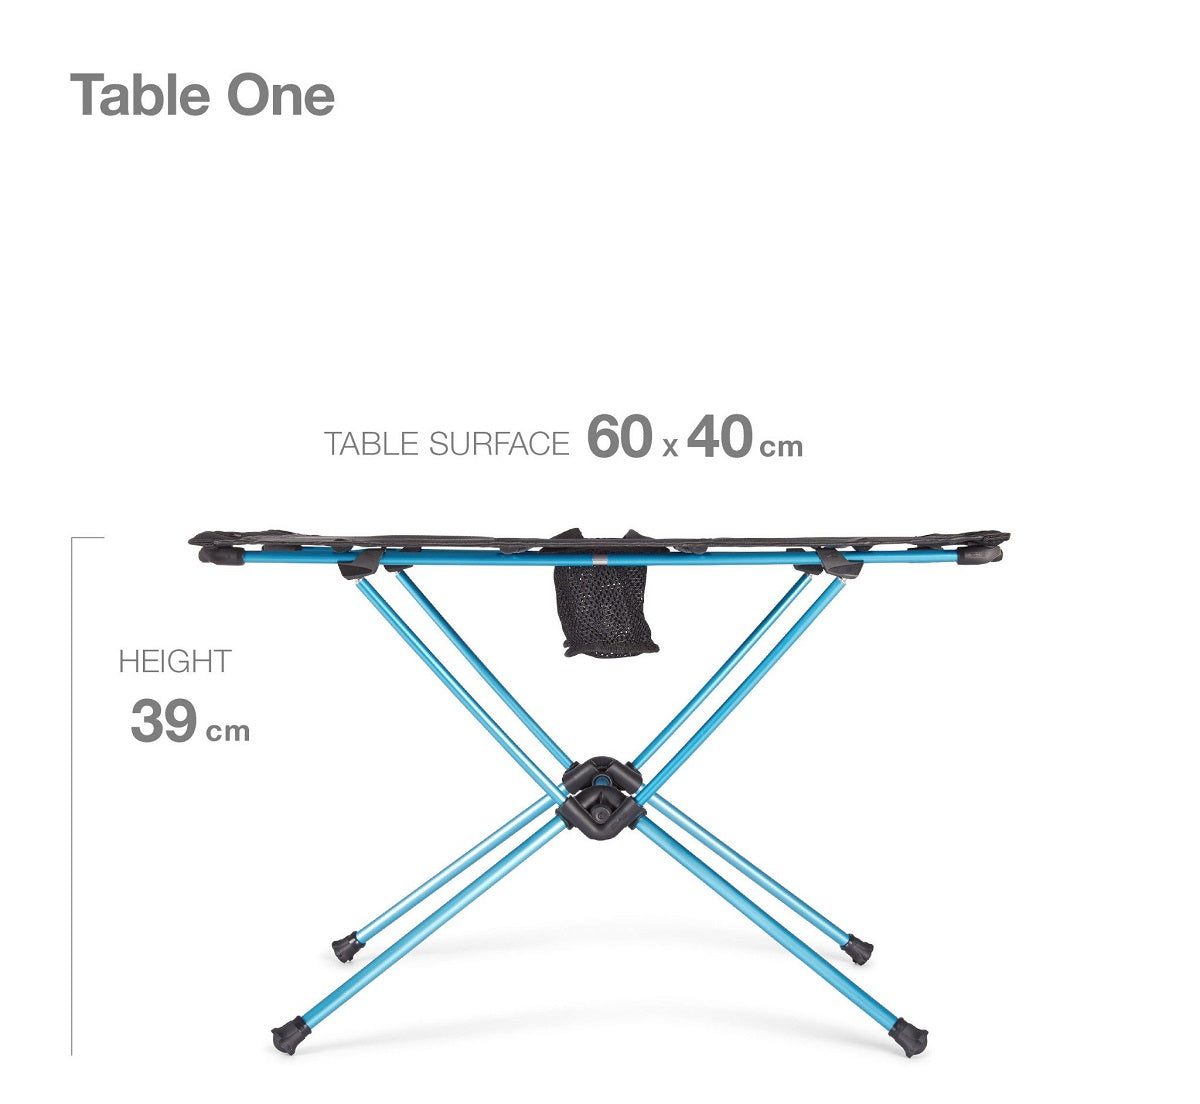 Helinox Table One Overview